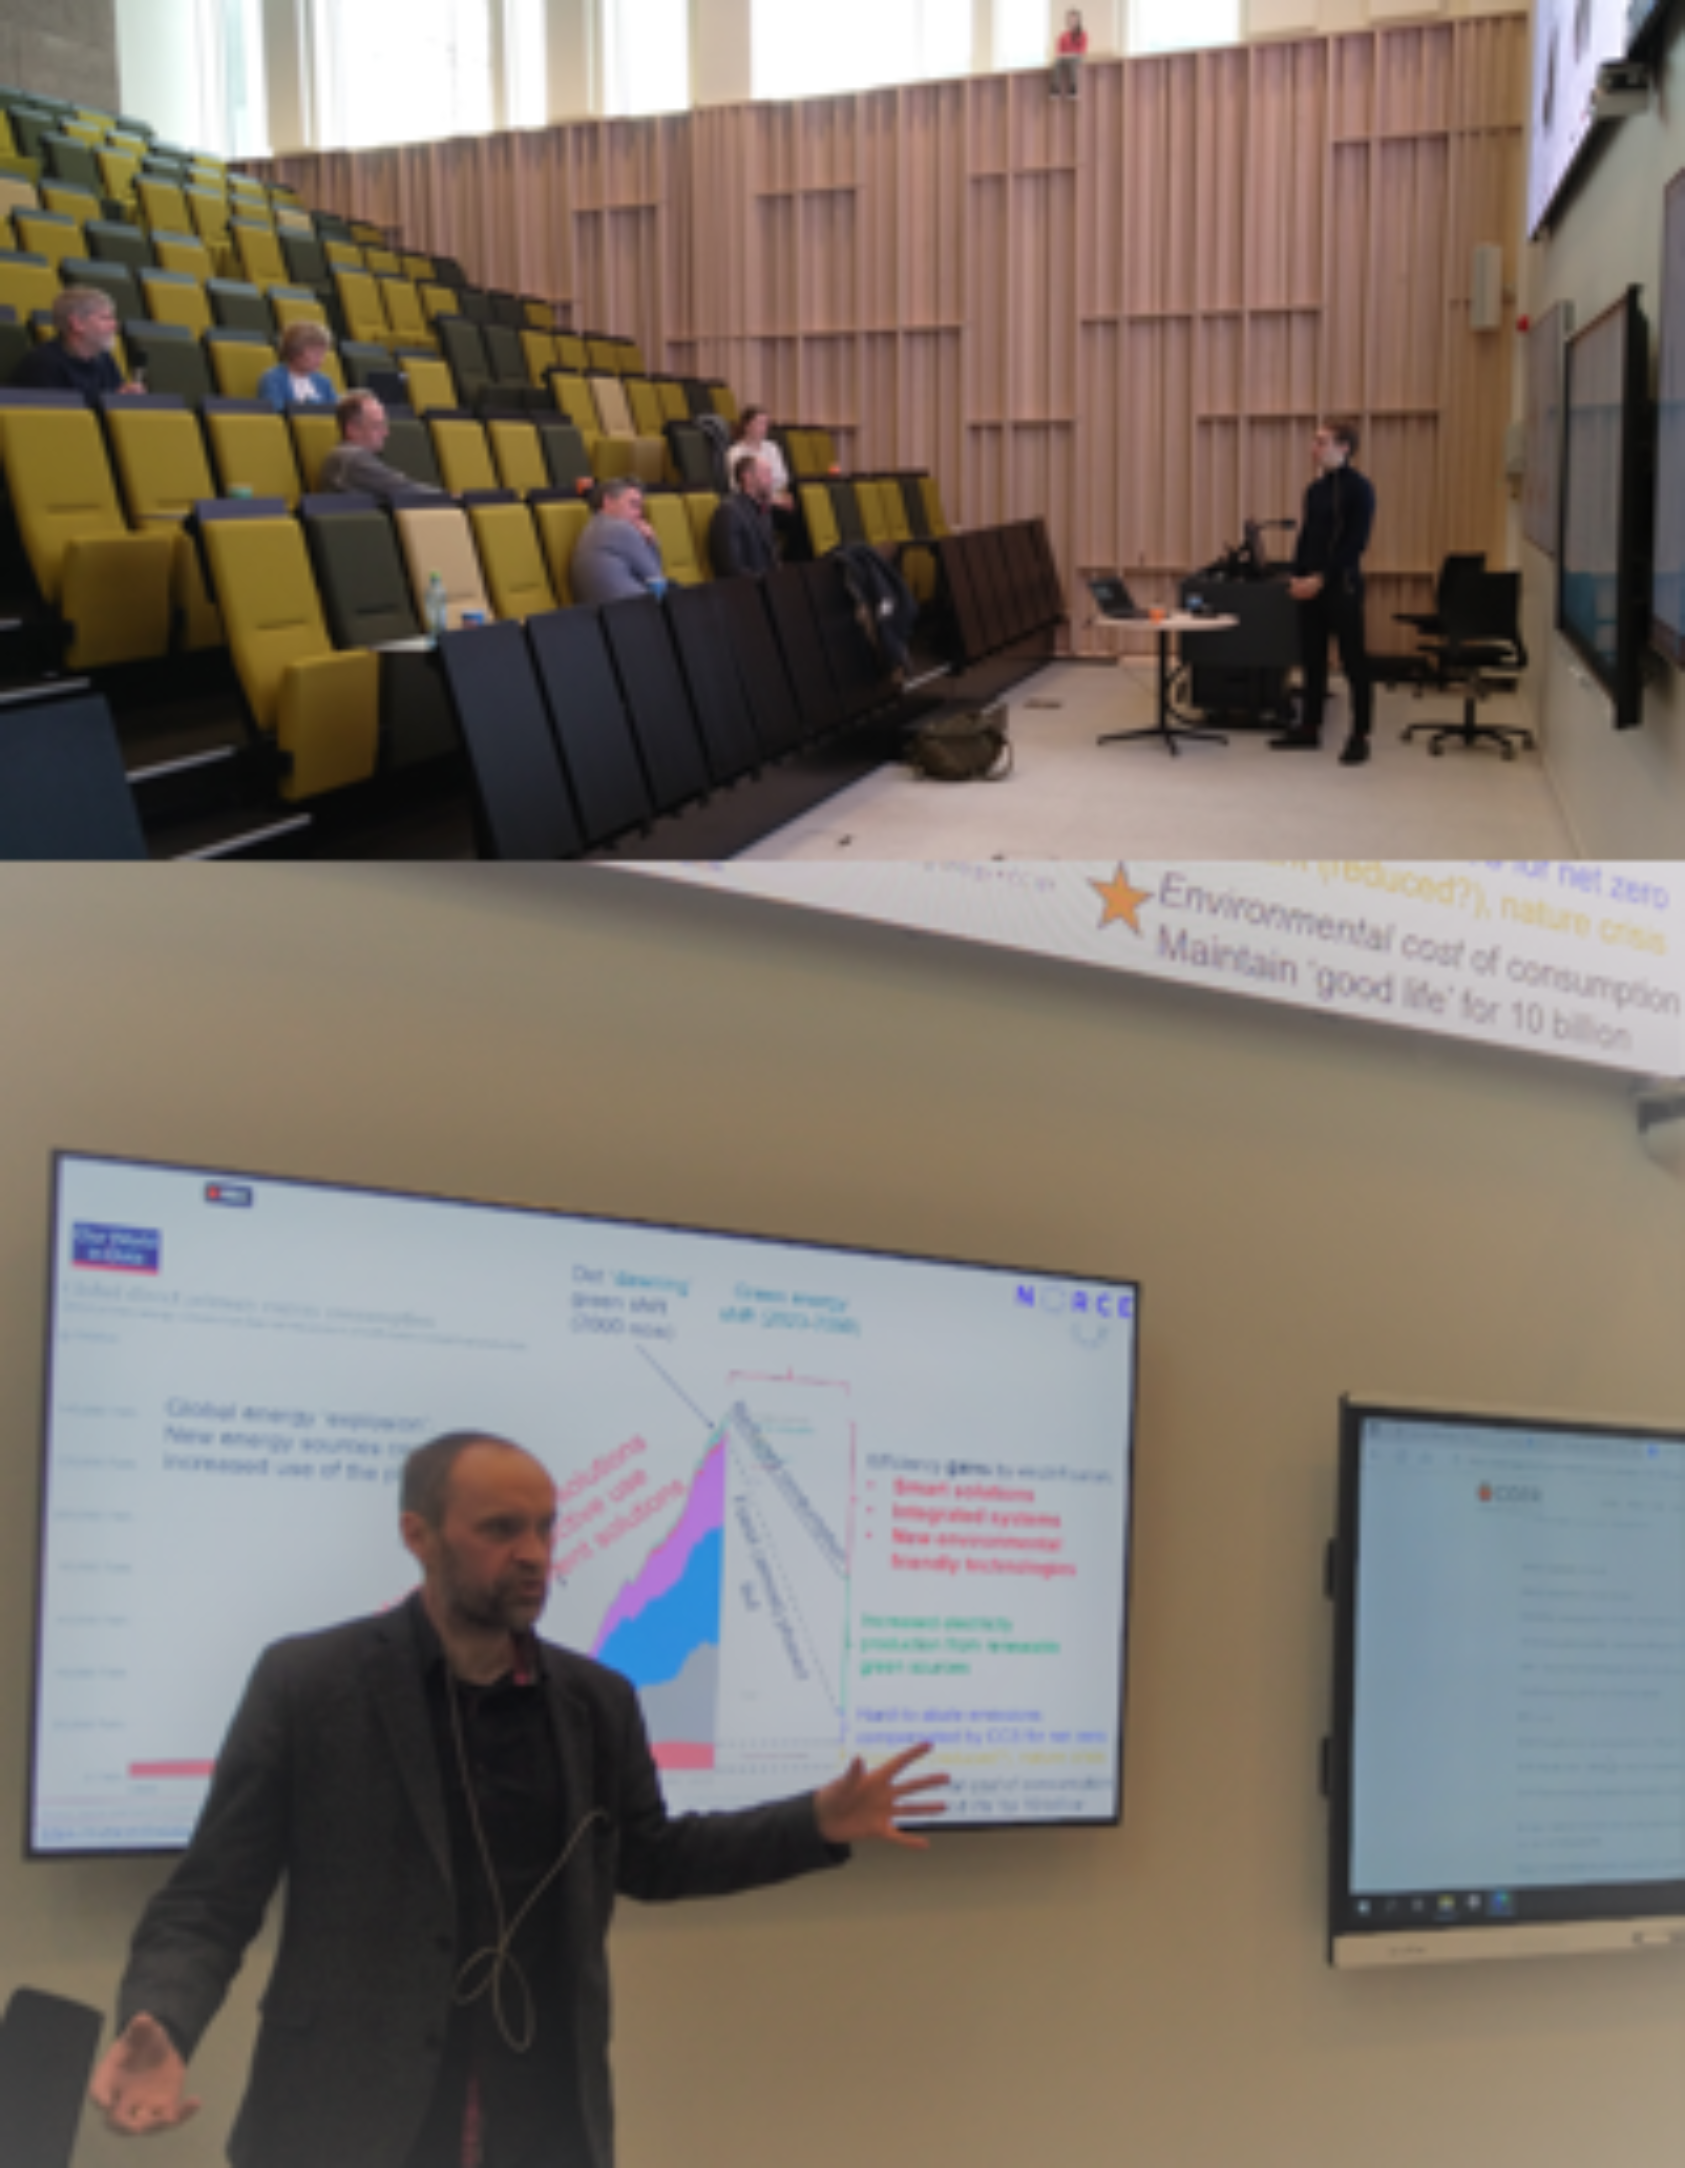 Fionn Iversen, Ivar Stefansson (UiB) and Anders Nermoen (NORCE) are presenting at the meeting., Stefansson nermoen presenterer, <p>NORCE</p>, A man presenting in a half crowded auditorium, a man talkin in front of a screen. Photo collage.